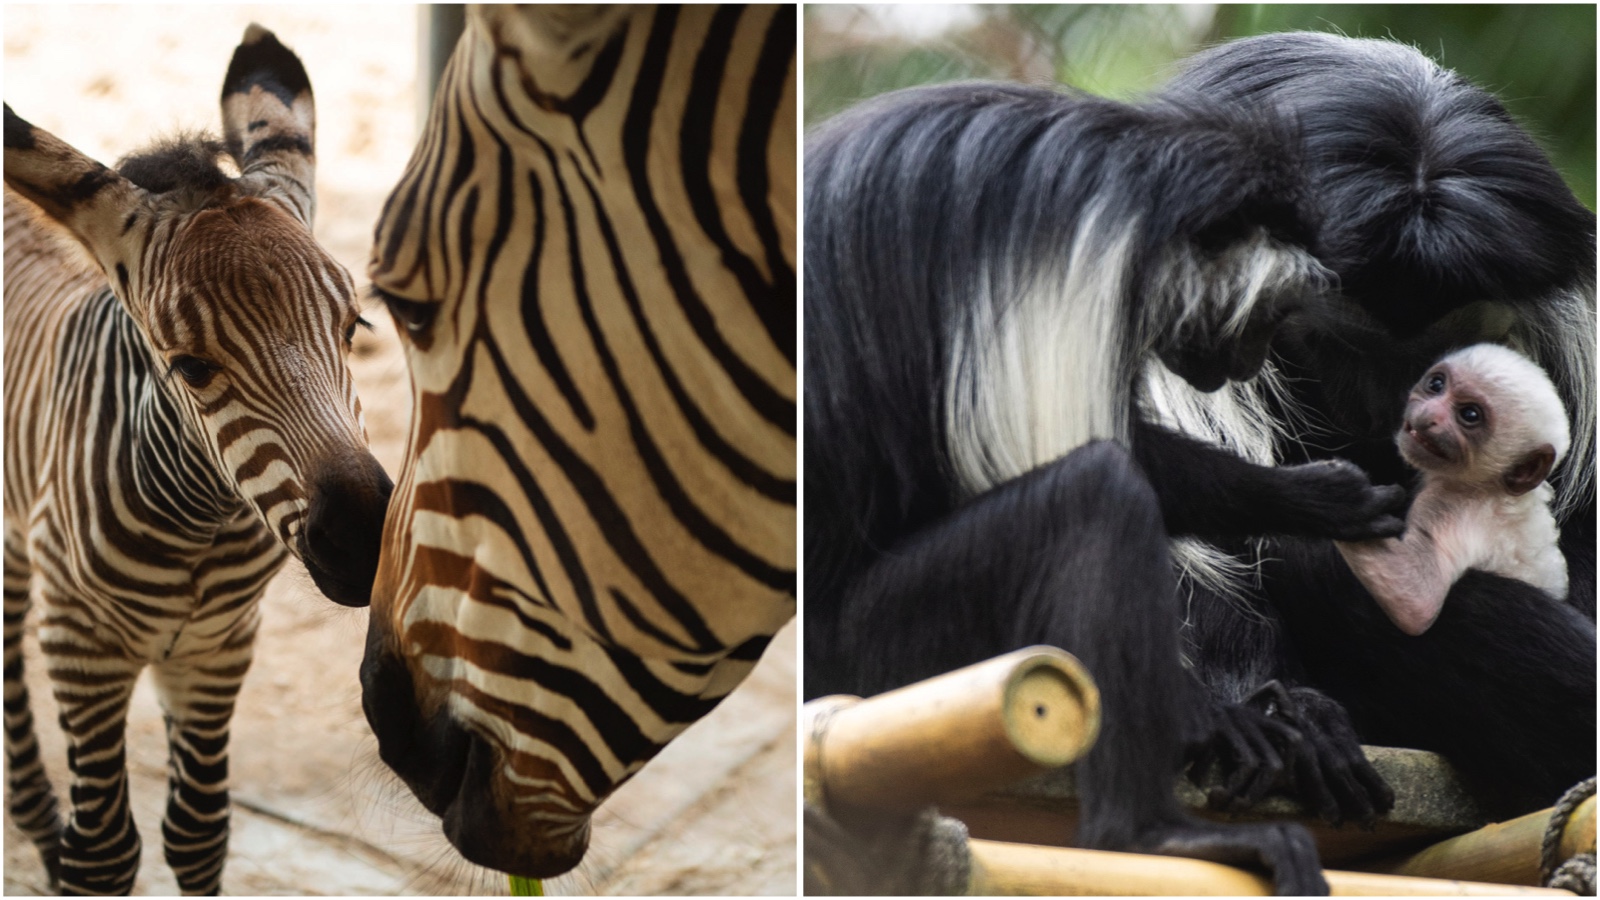 Disney’s Animal Kingdom Welcomes Two New Babies in the New Year